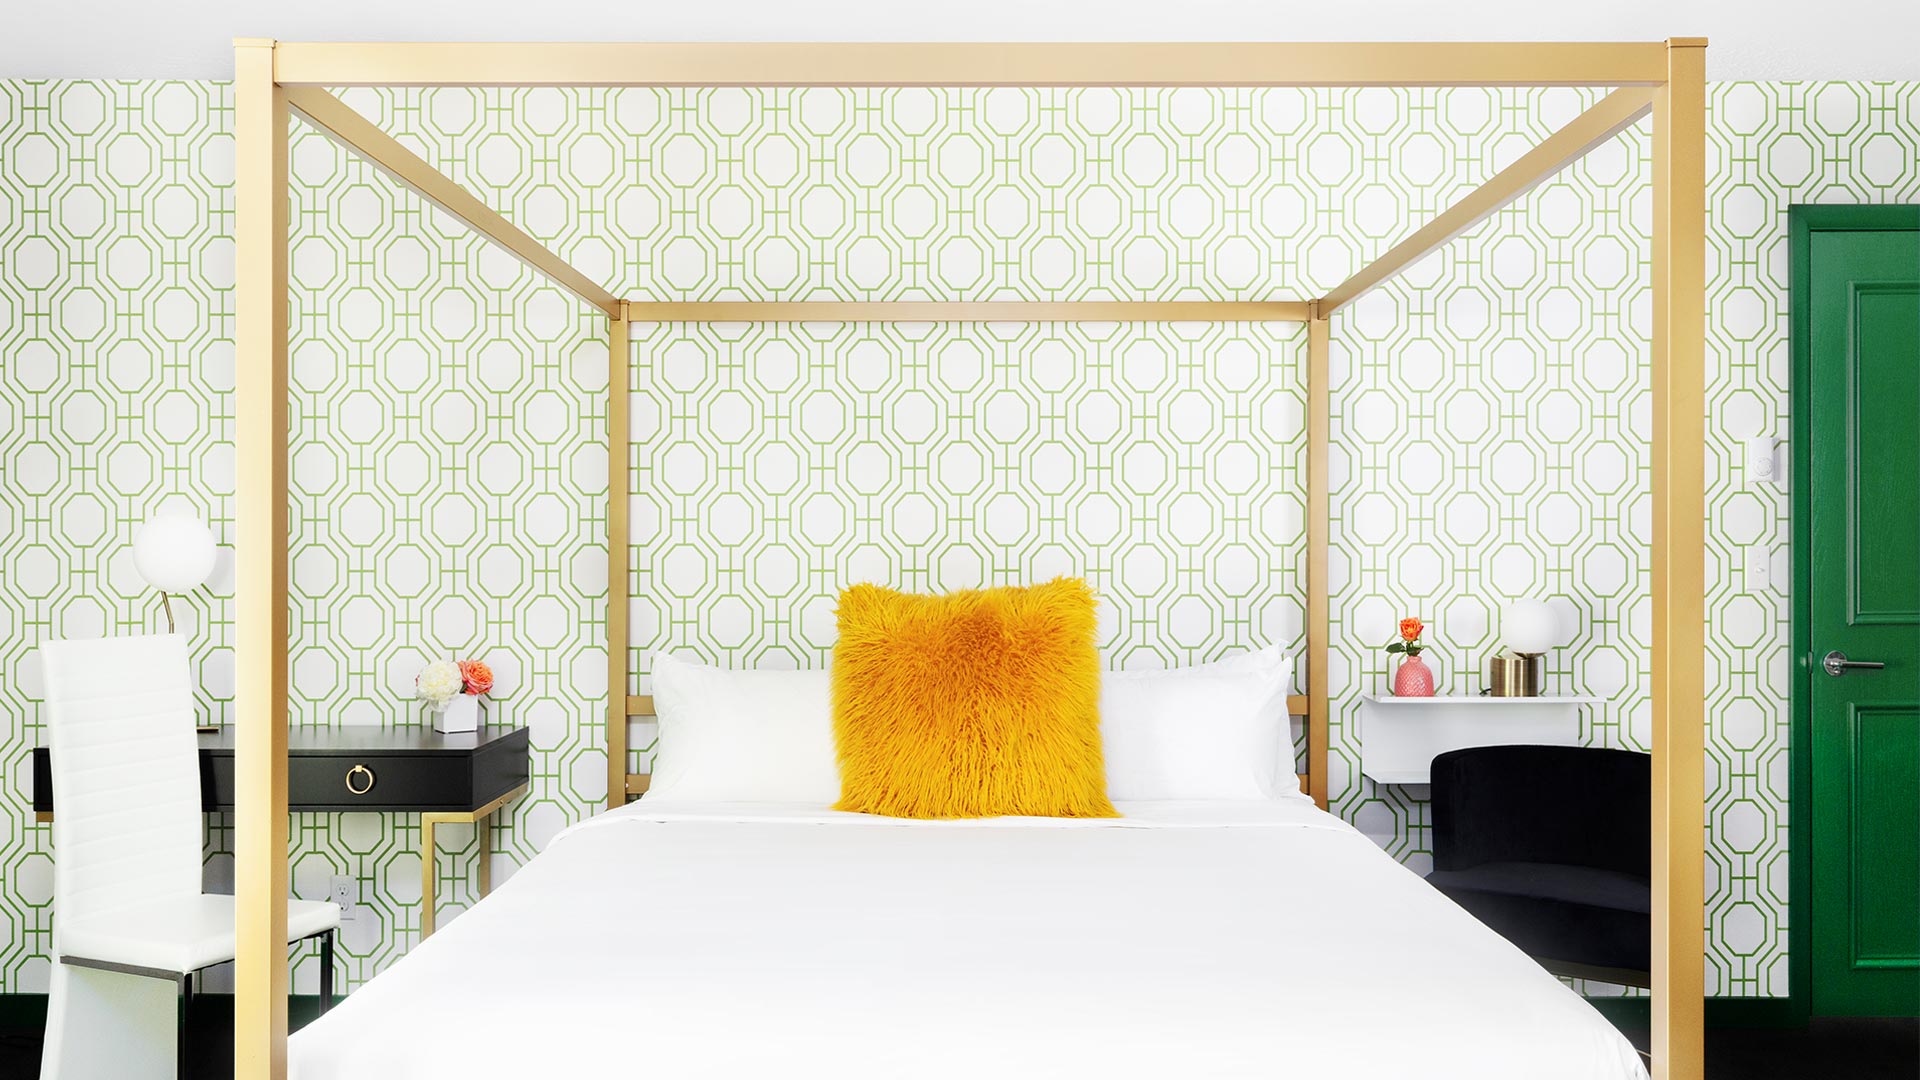 detail shot of a bedroom with a canopy bed. the bed has white linens with a yellow fluffy accent pillow. There are tables on either side of the bed. There is green retro-inspired wallpaper behind the bed